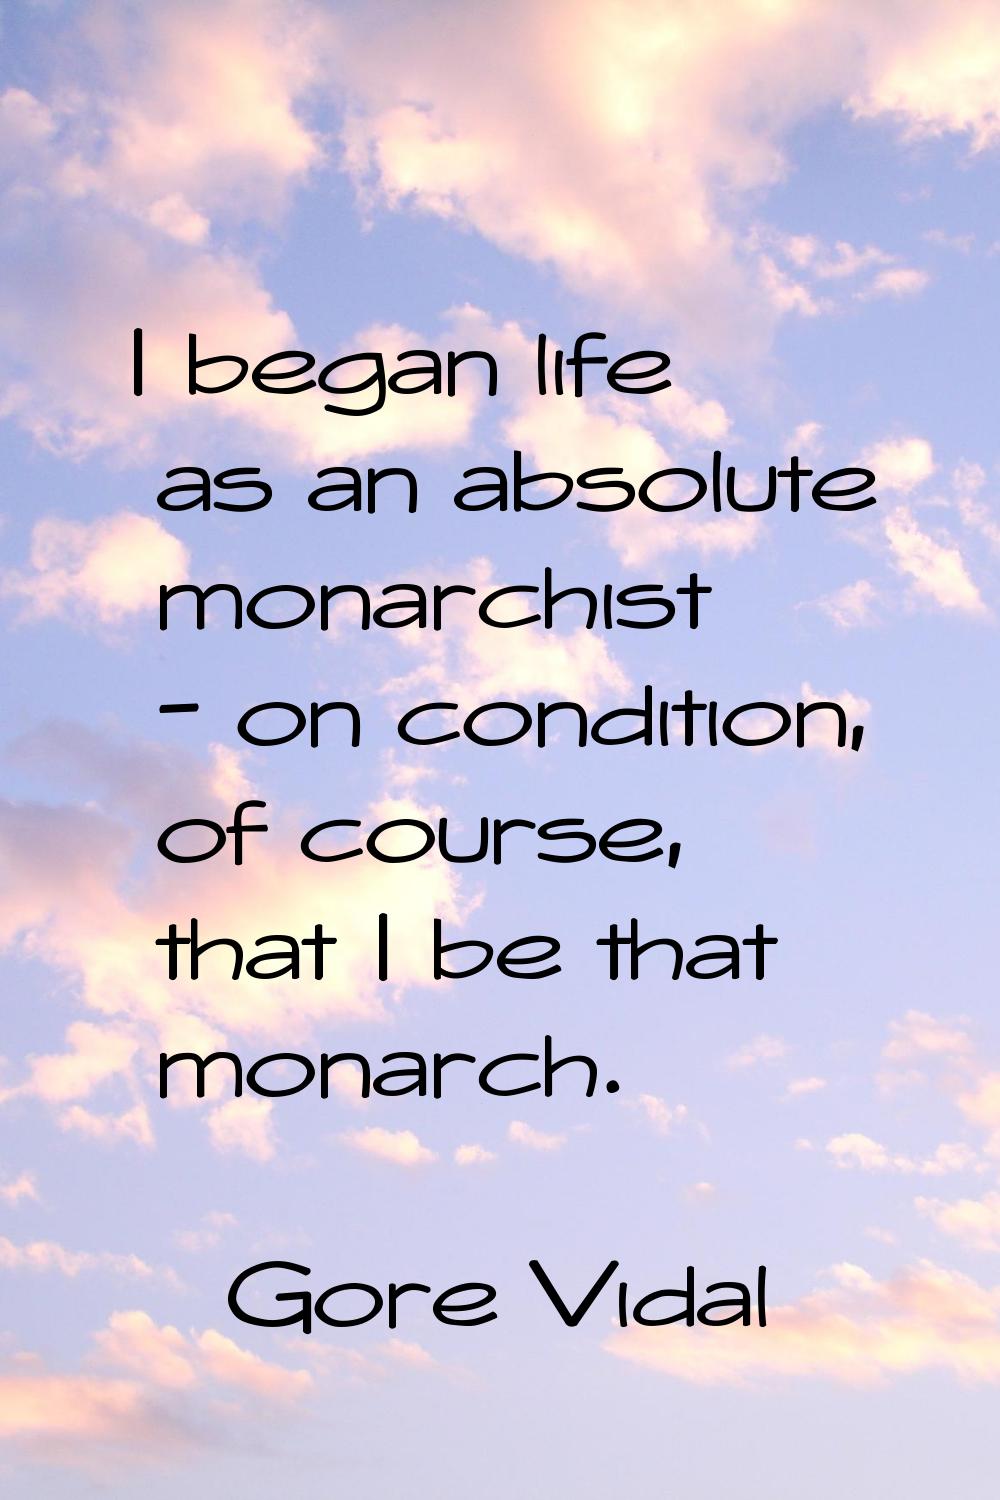 I began life as an absolute monarchist - on condition, of course, that I be that monarch.